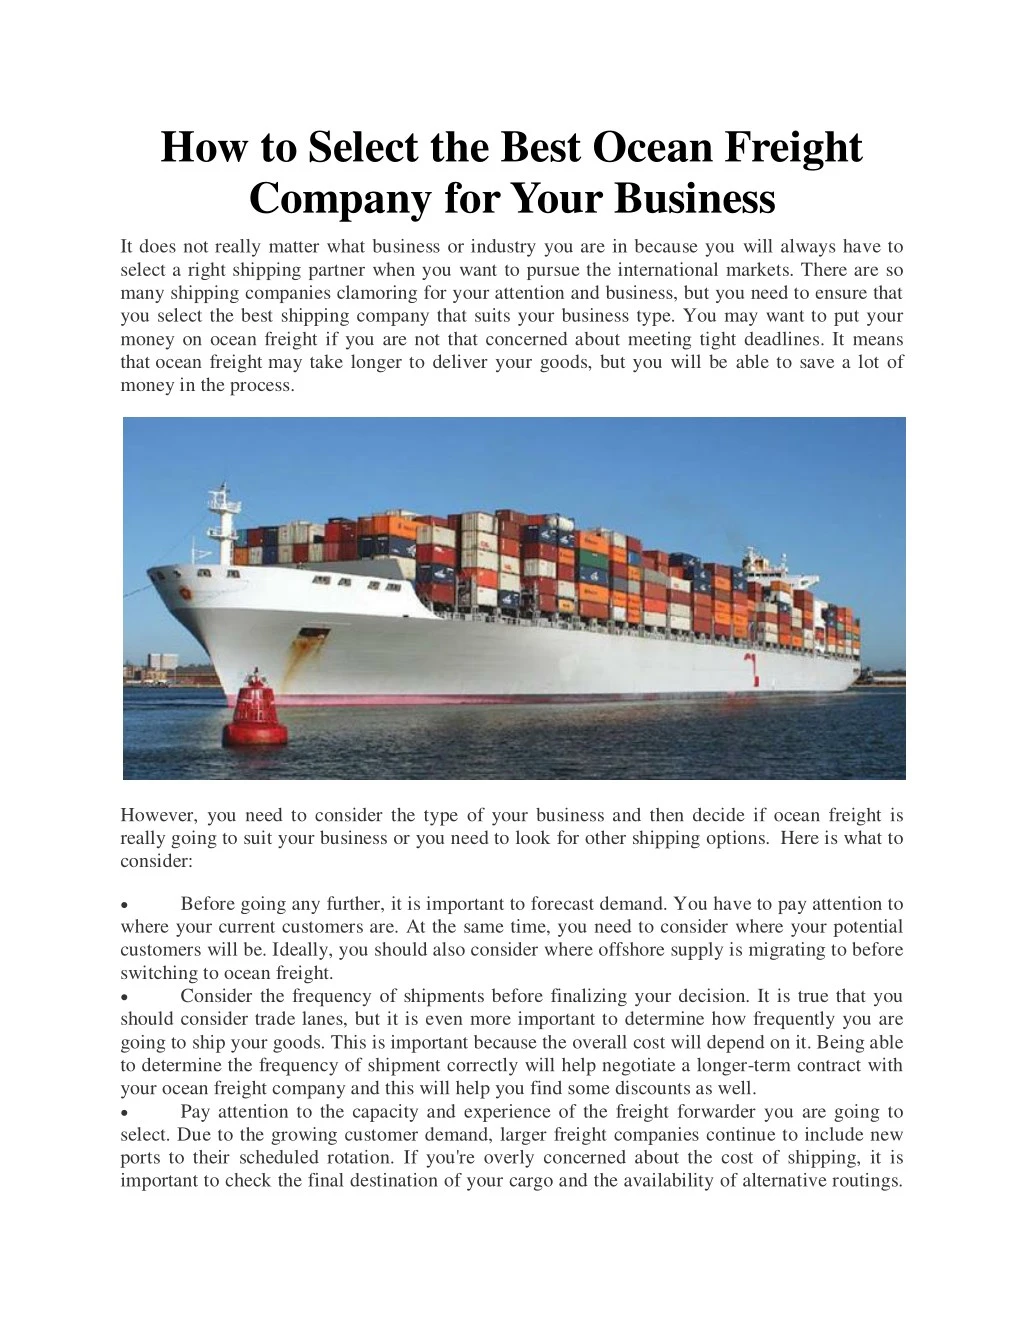 how to select the best ocean freight company